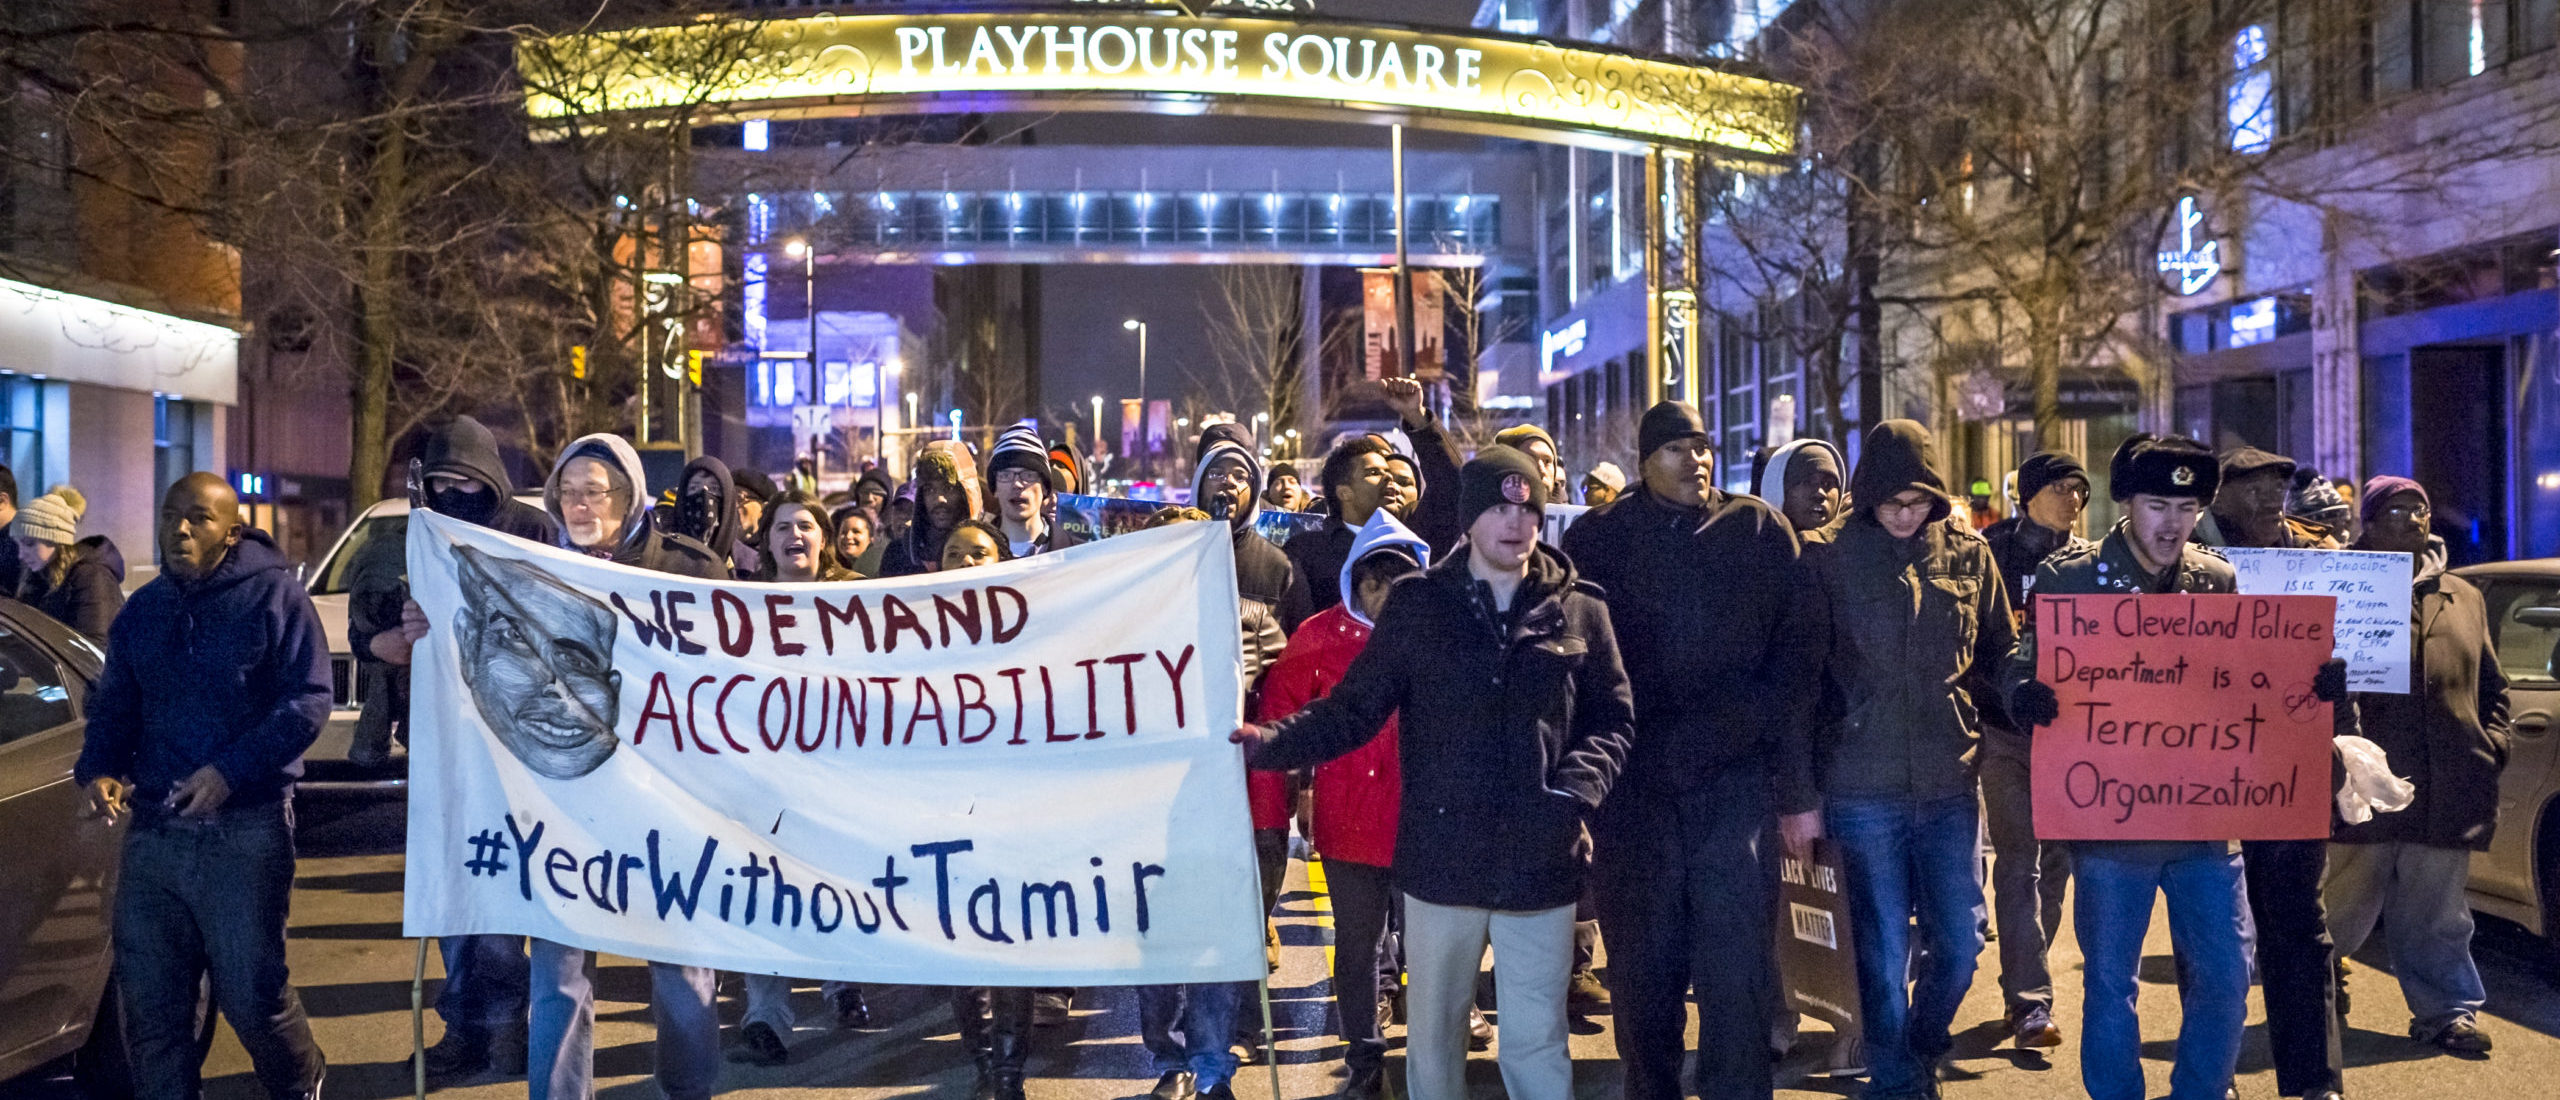 Officers Who Killed Tamir Rice Won’t Face Federal Charges, DOJ